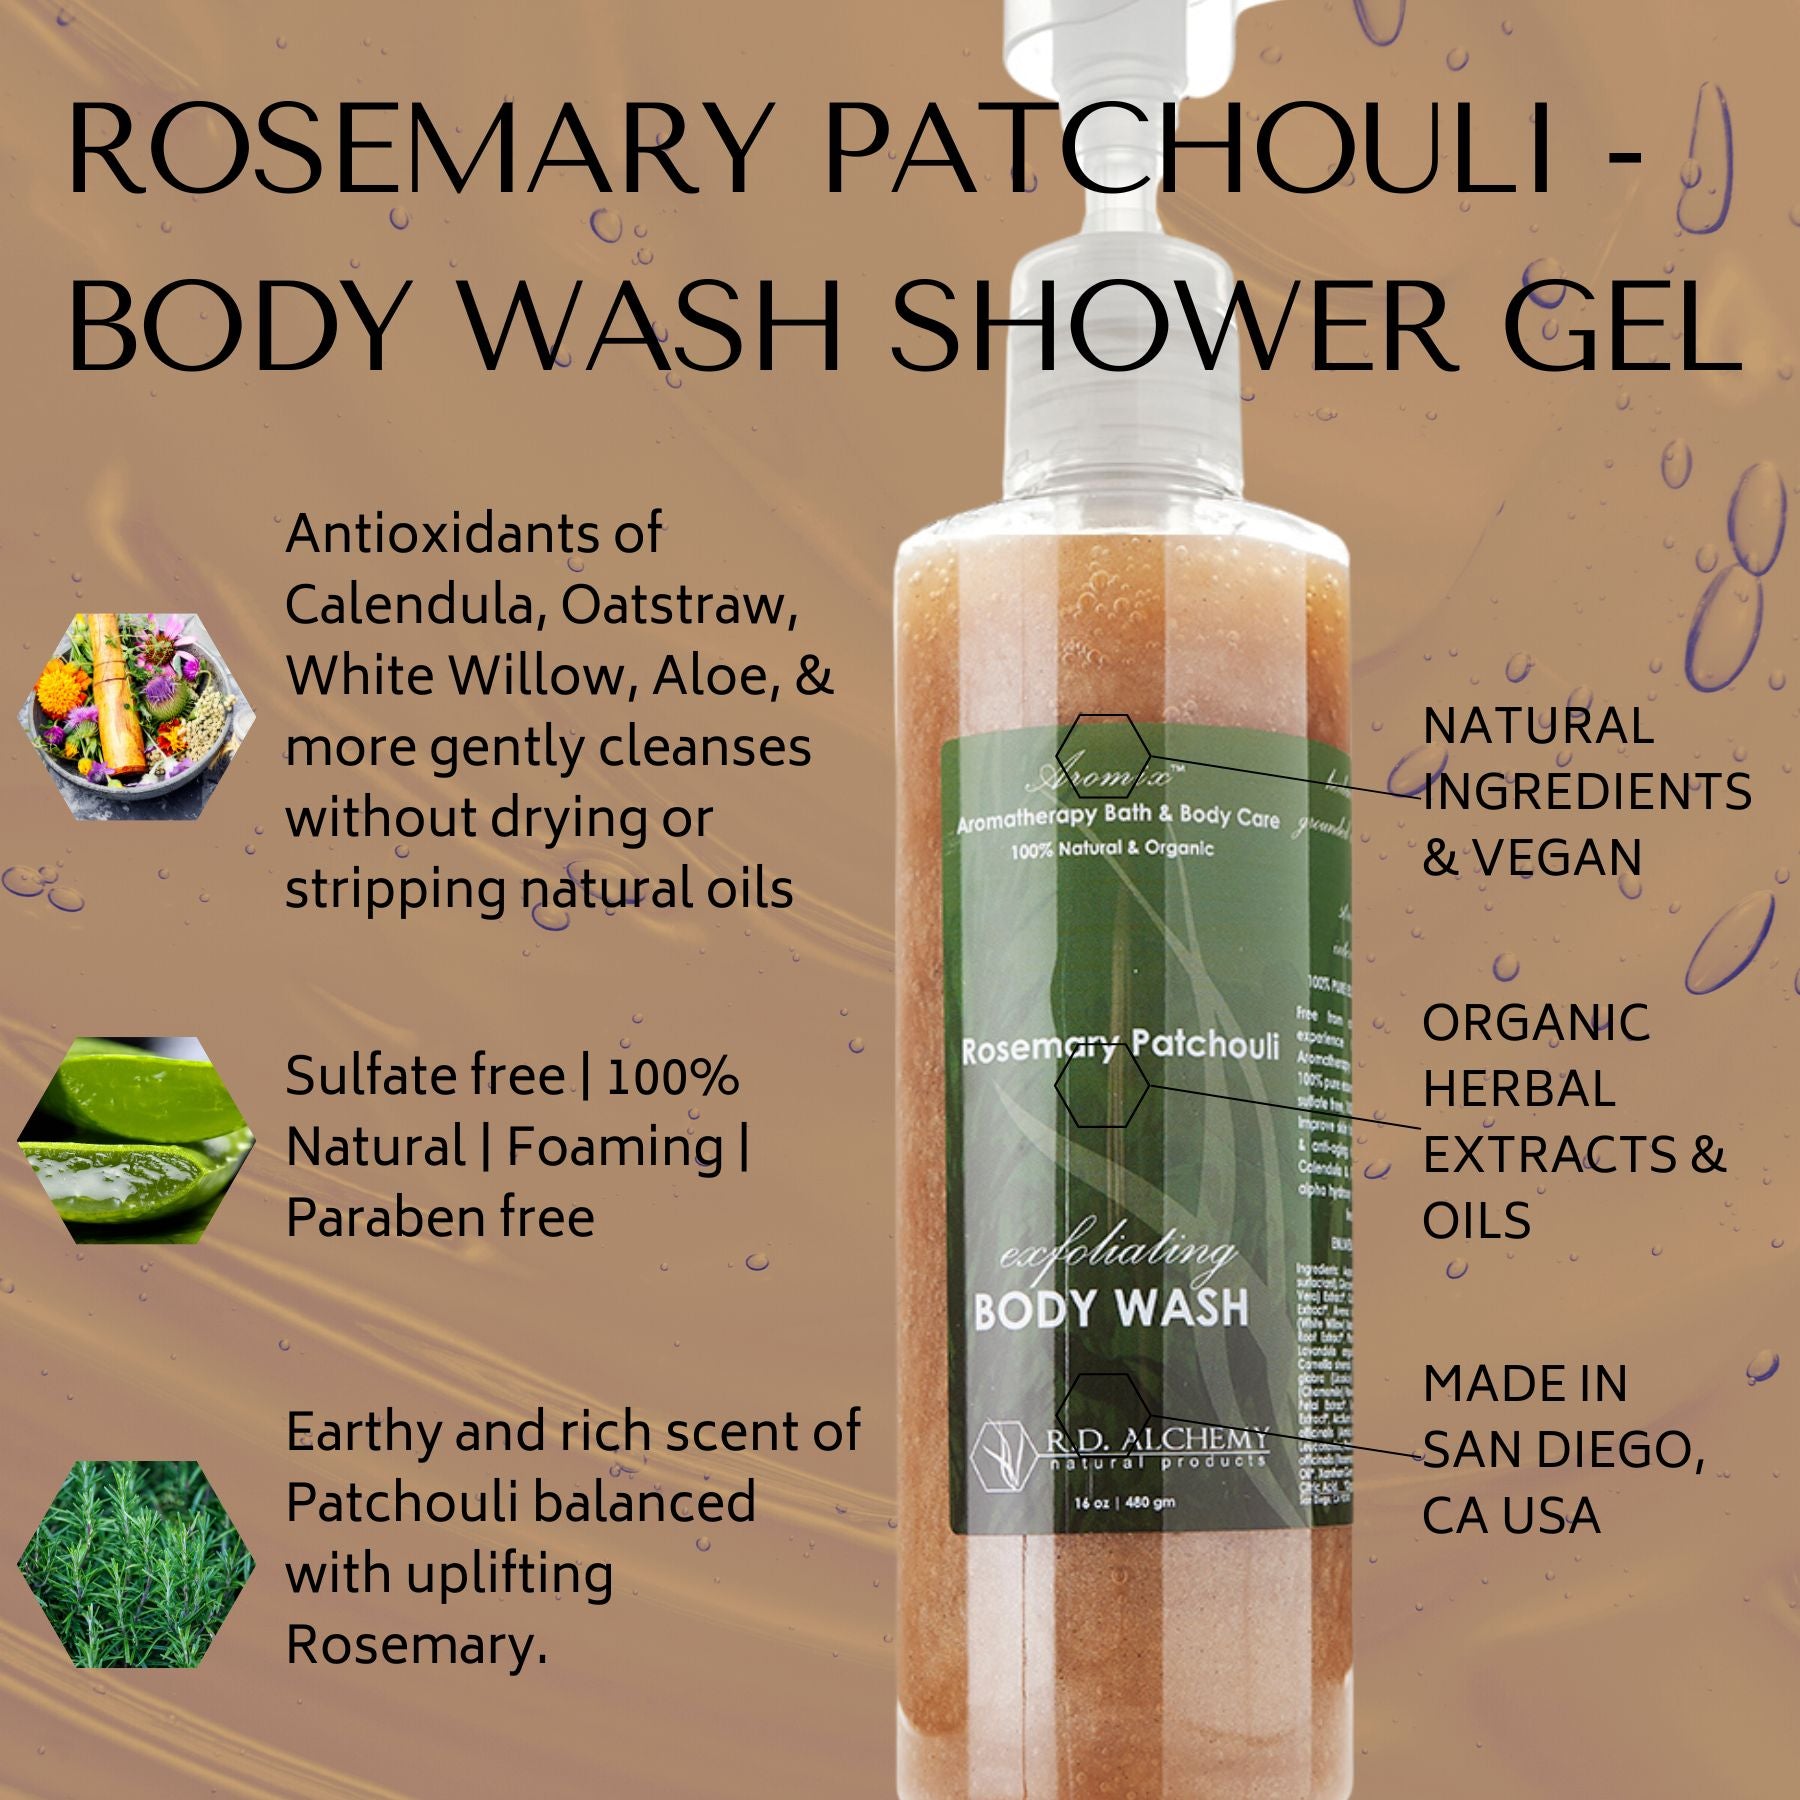 AROMATICA Embrace Body Wash Neroli & Patchouli for Aromatic Shower |  Relaxing Your Body & Mind with Earthly and Floral Fragrances | Vegan,  Sulfate